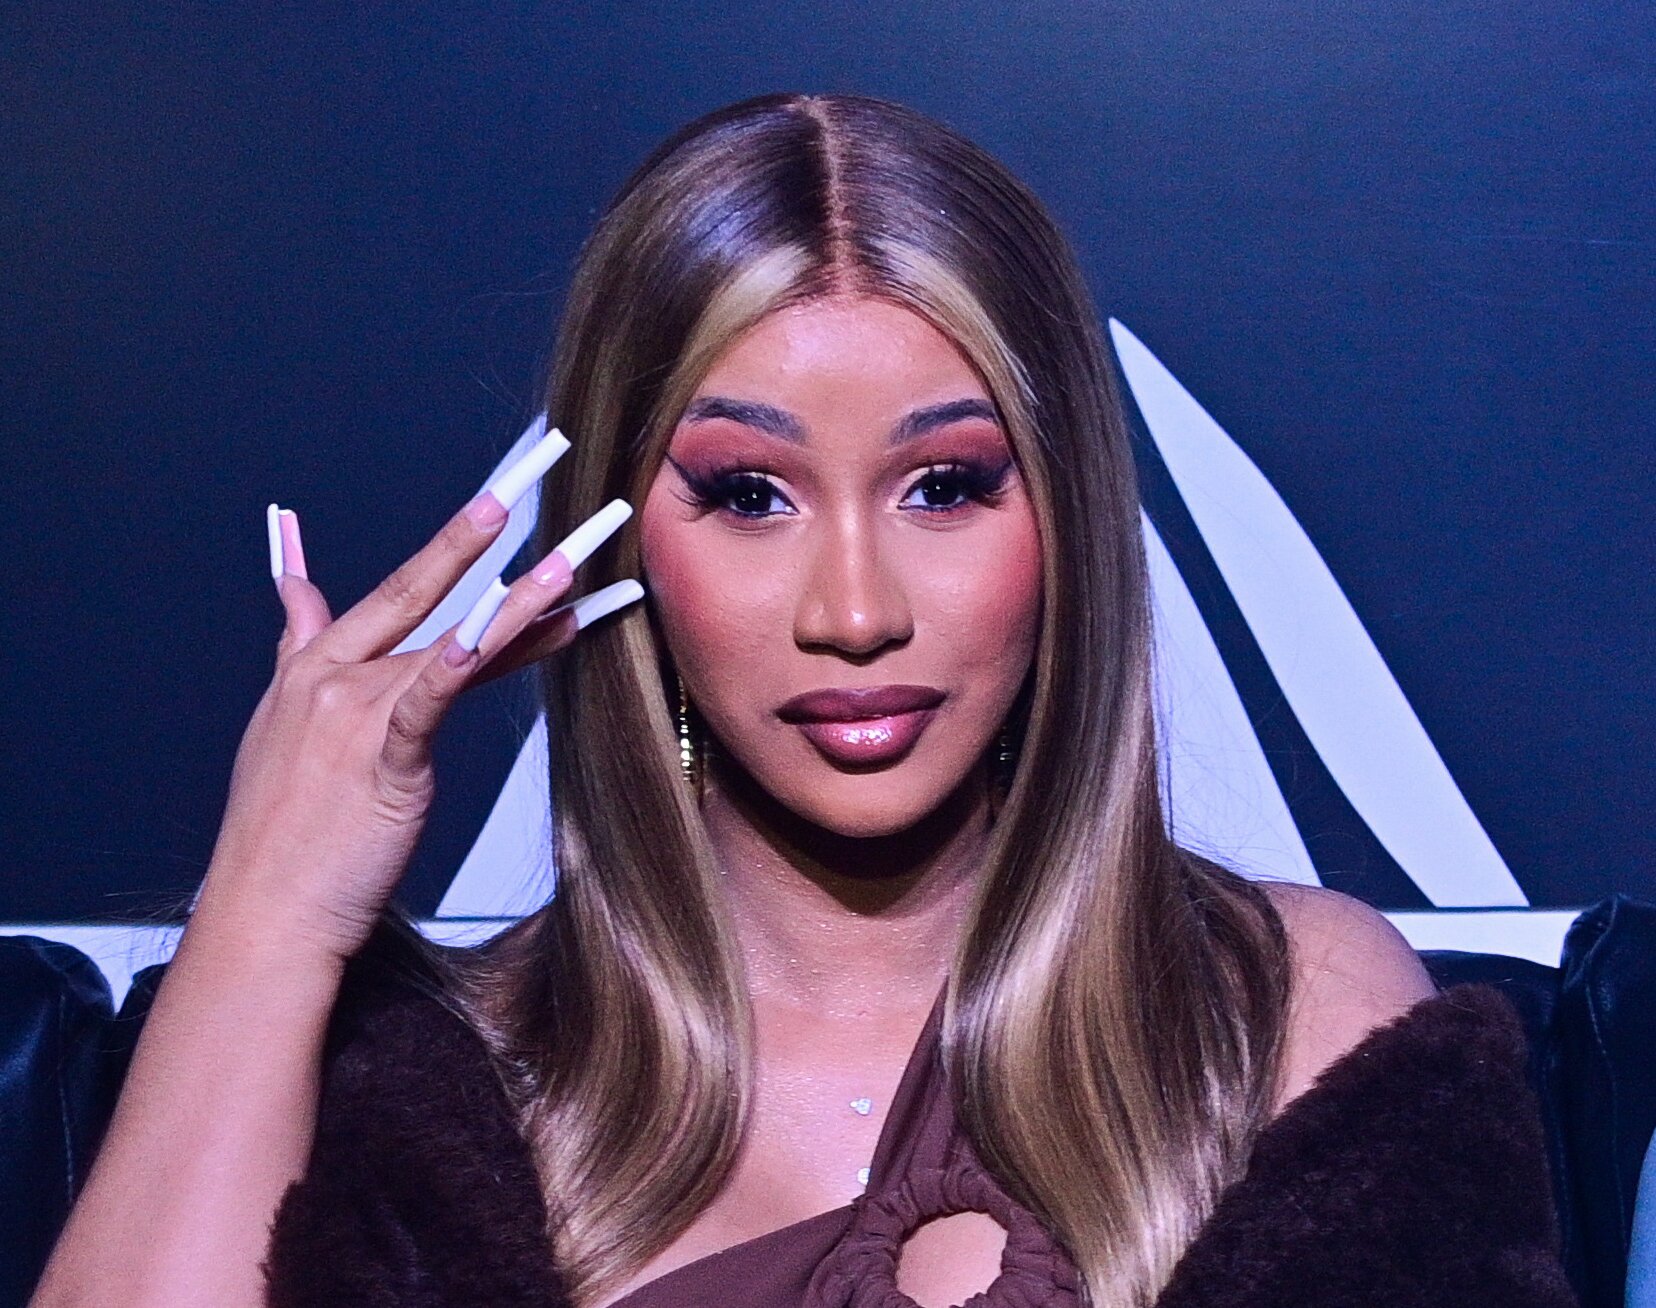 Cardi B Had a Fun Matchy-Matchy Moment With Her Wig and Boots | HelloGiggles